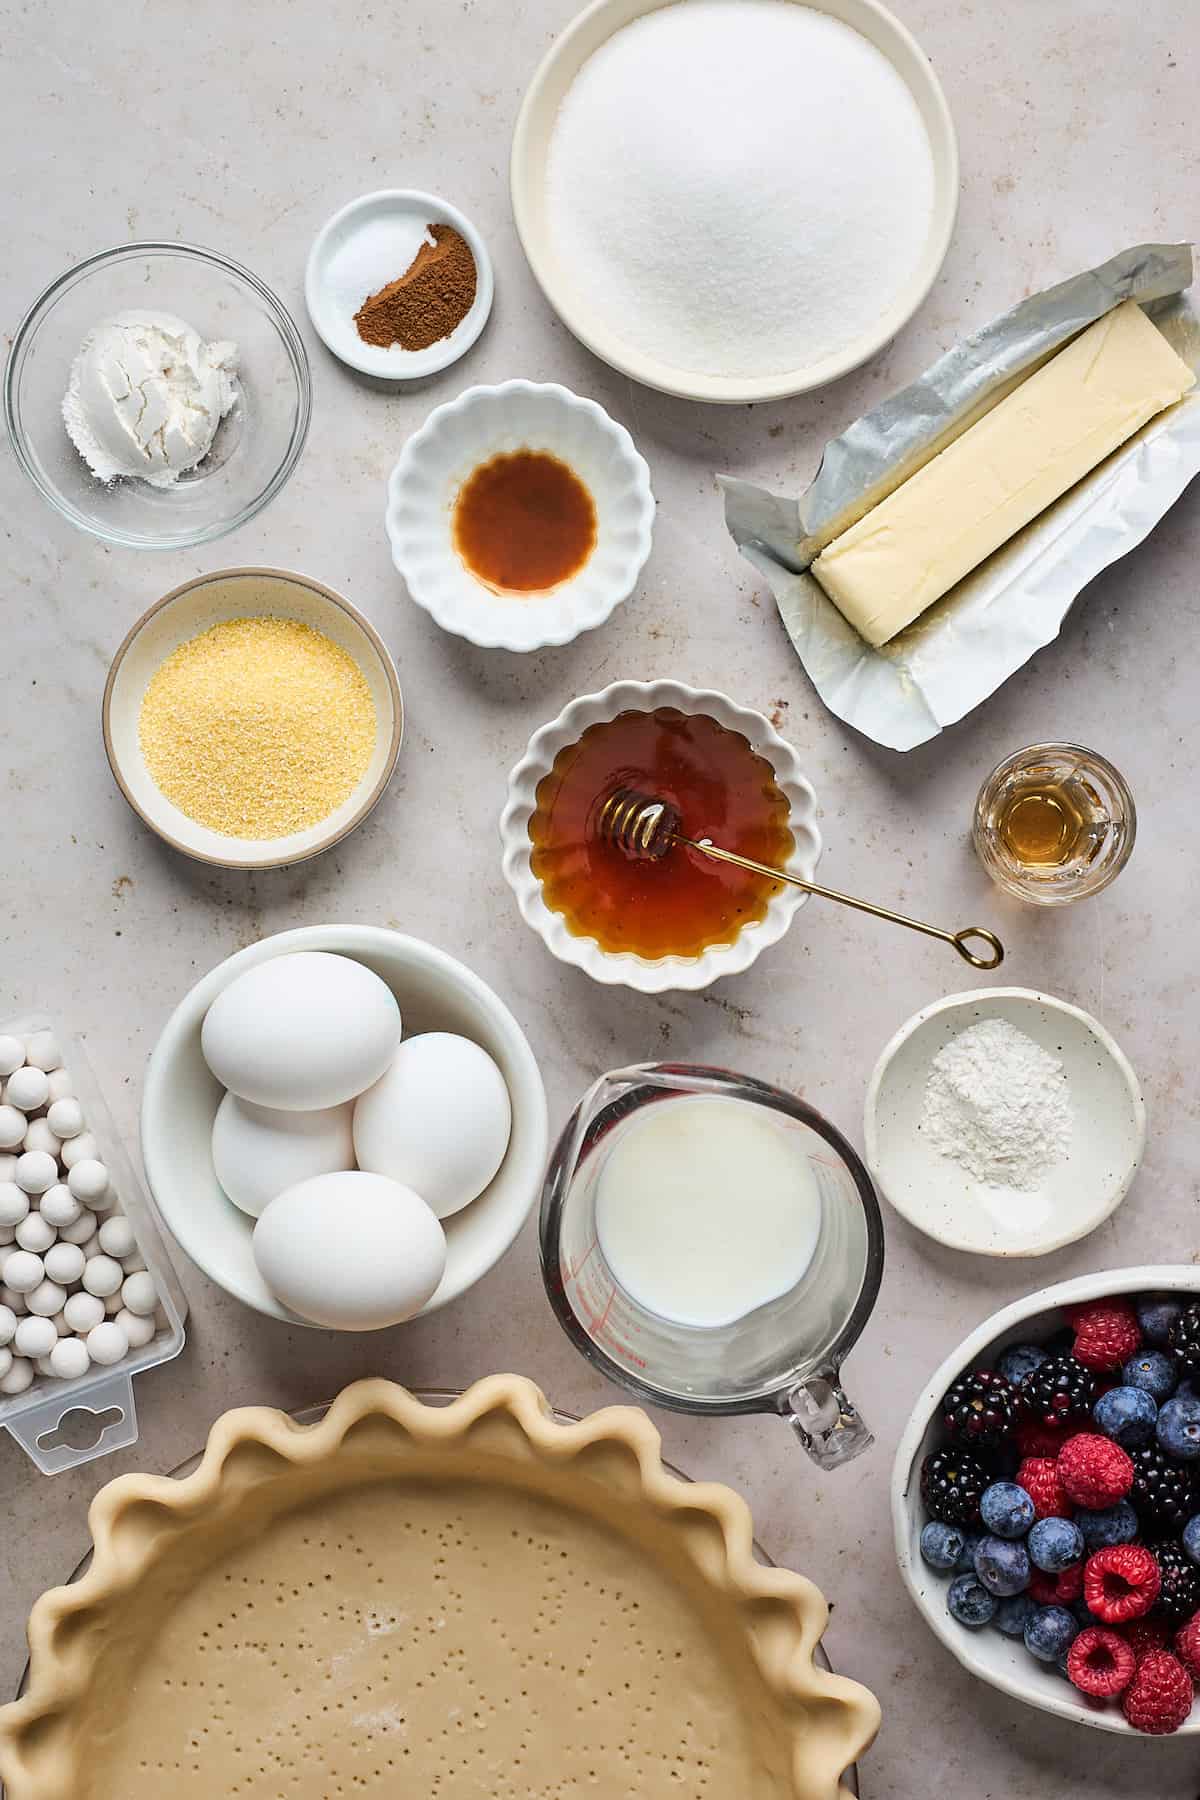 Ingredients to make honey cream pie in small bowls on a white surface.